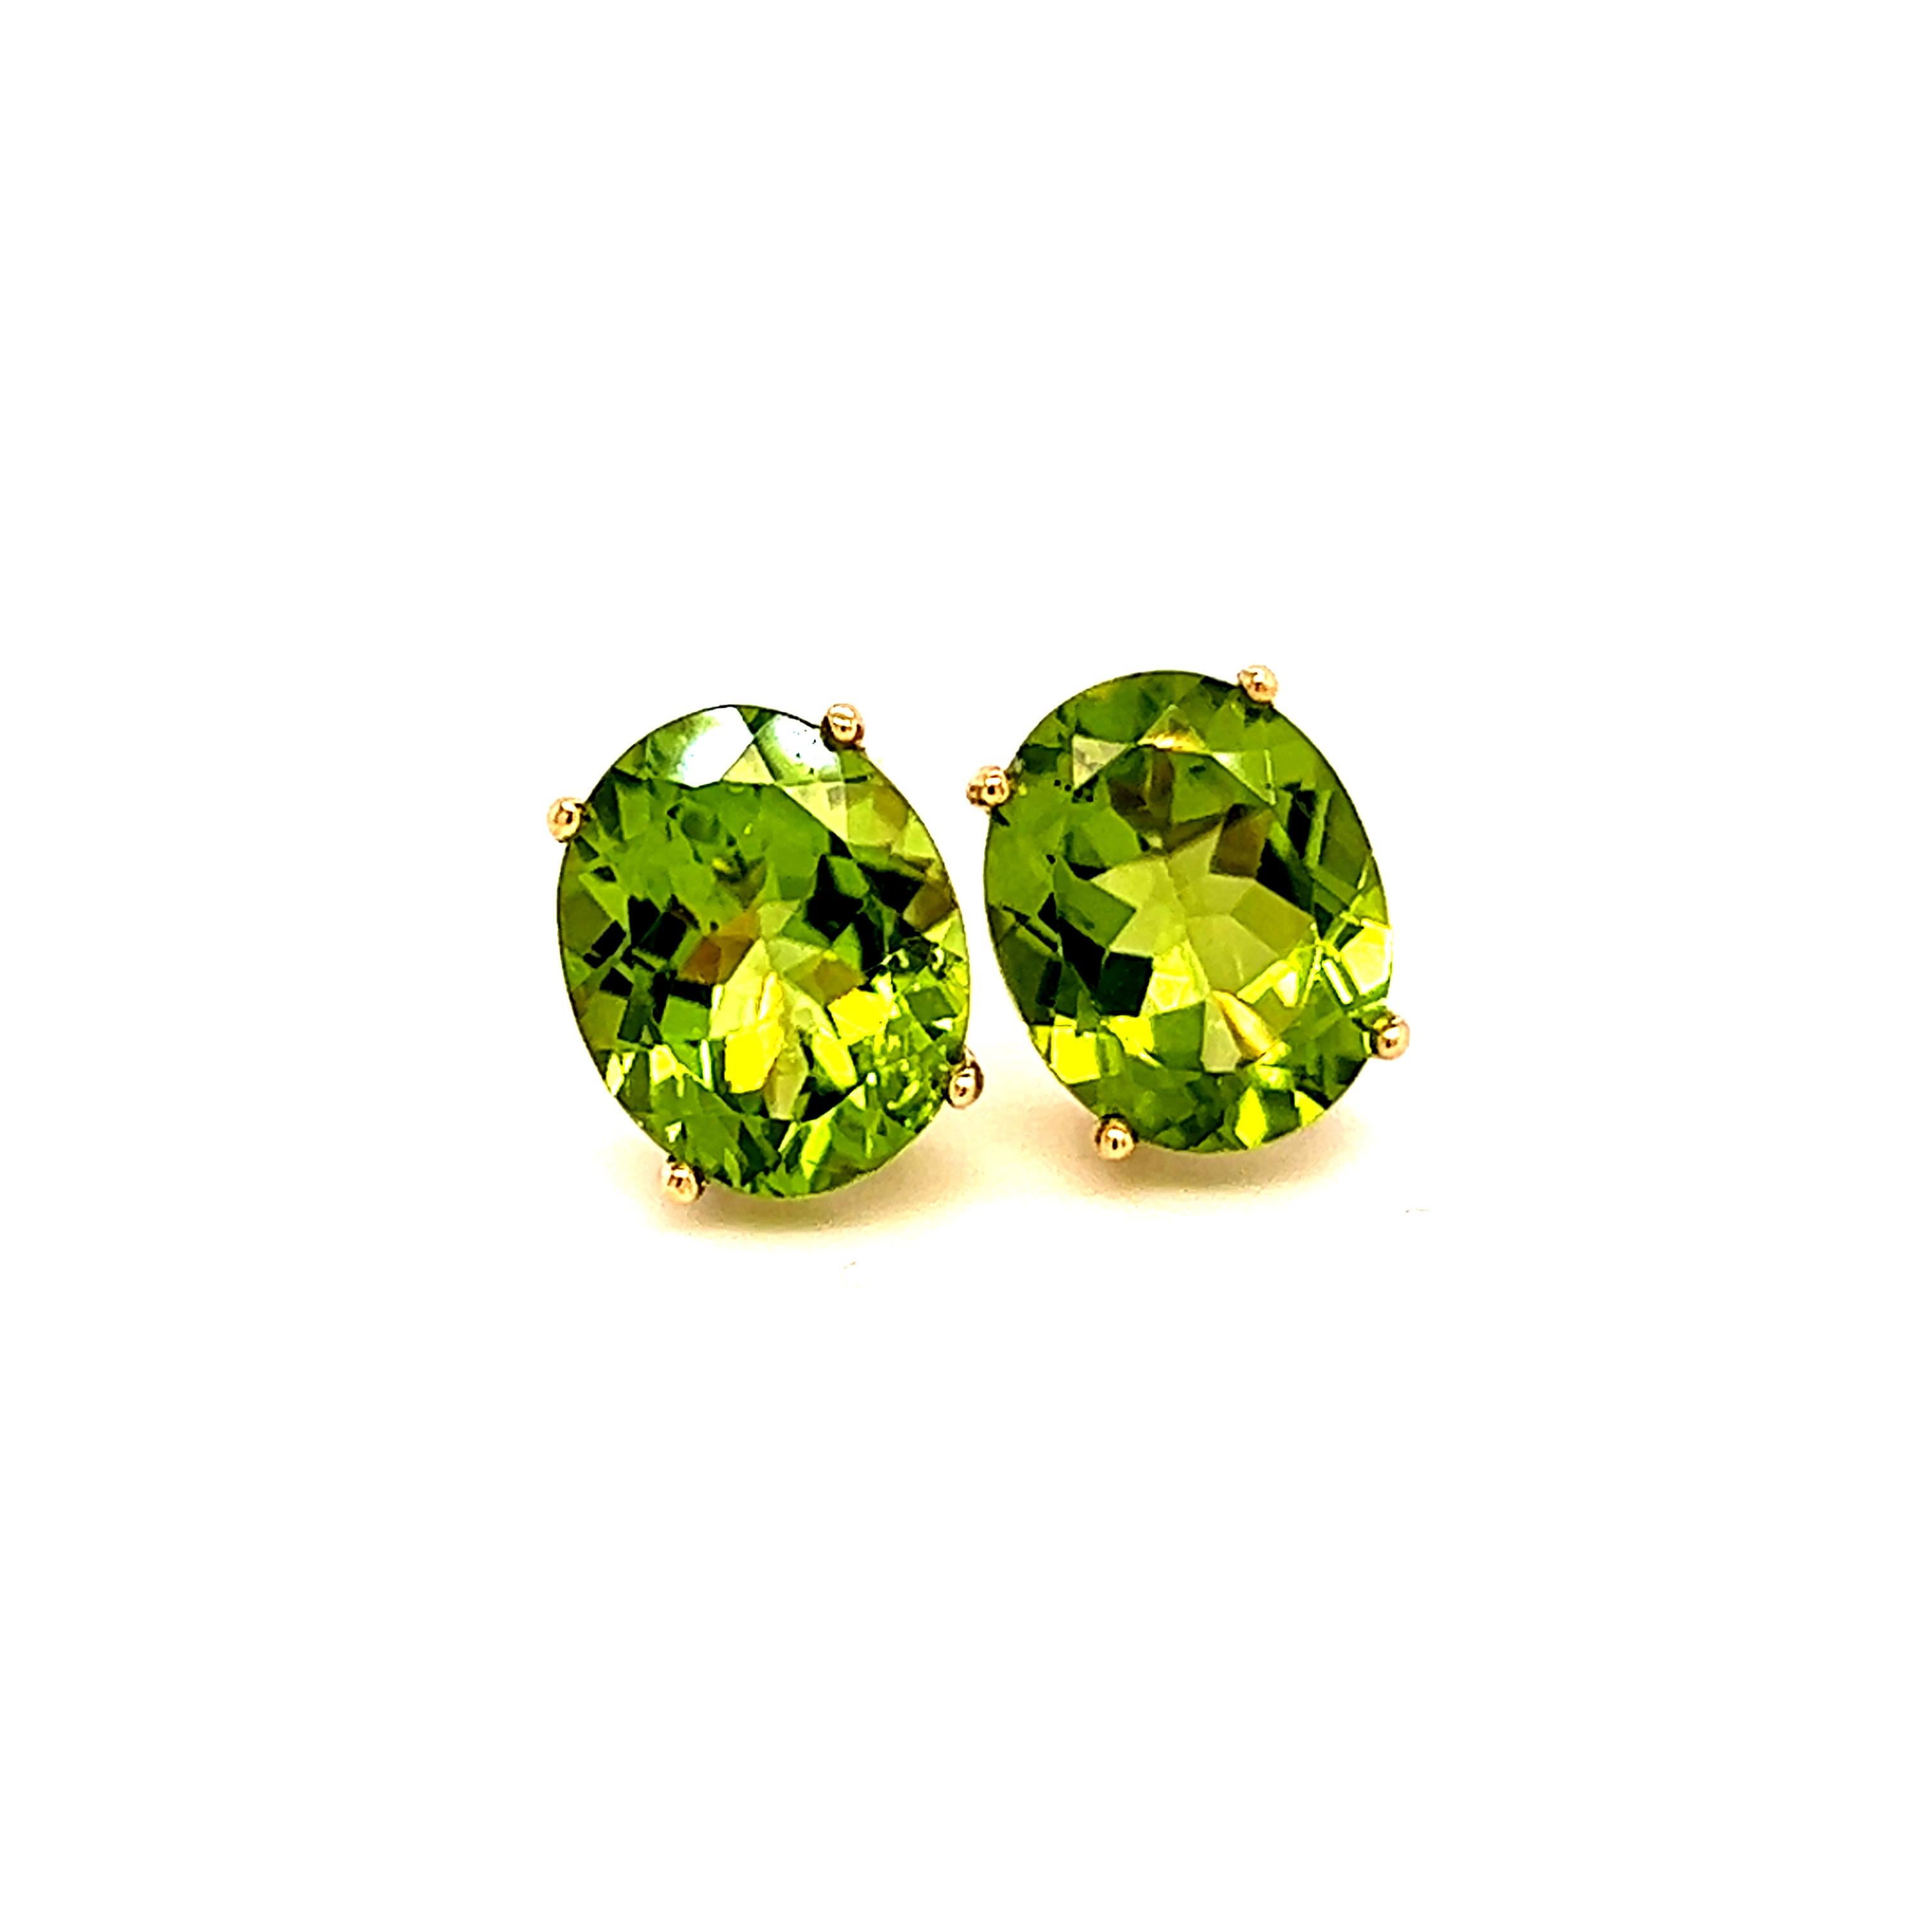 Oval Shape Peridot Stud Earrings 14k Y Gold 5.20 CTW Certified $3,950 211184

This is a Unique Custom Made Glamorous Piece of Jewelry!

Nothing says, “I Love you” more than Diamonds and Pearls!

These Peridot earrings have been Certified, Inspected,